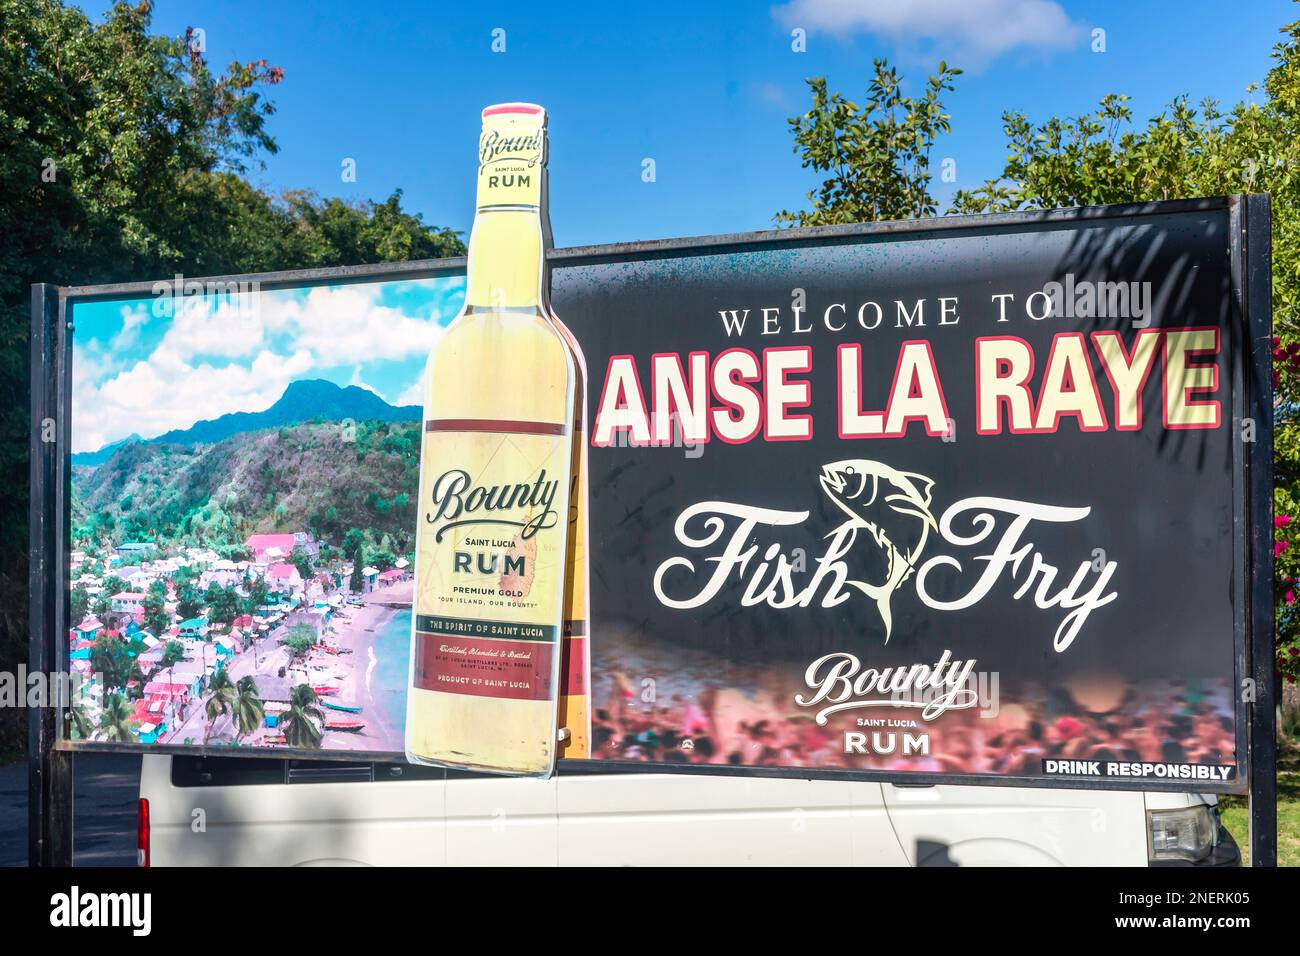 Welcome sign advertising Friday Fish Fry event, Anse la Raye, Anse la Raye District, Saint Lucia, Lesser Antilles, Caribbean Stock Photo